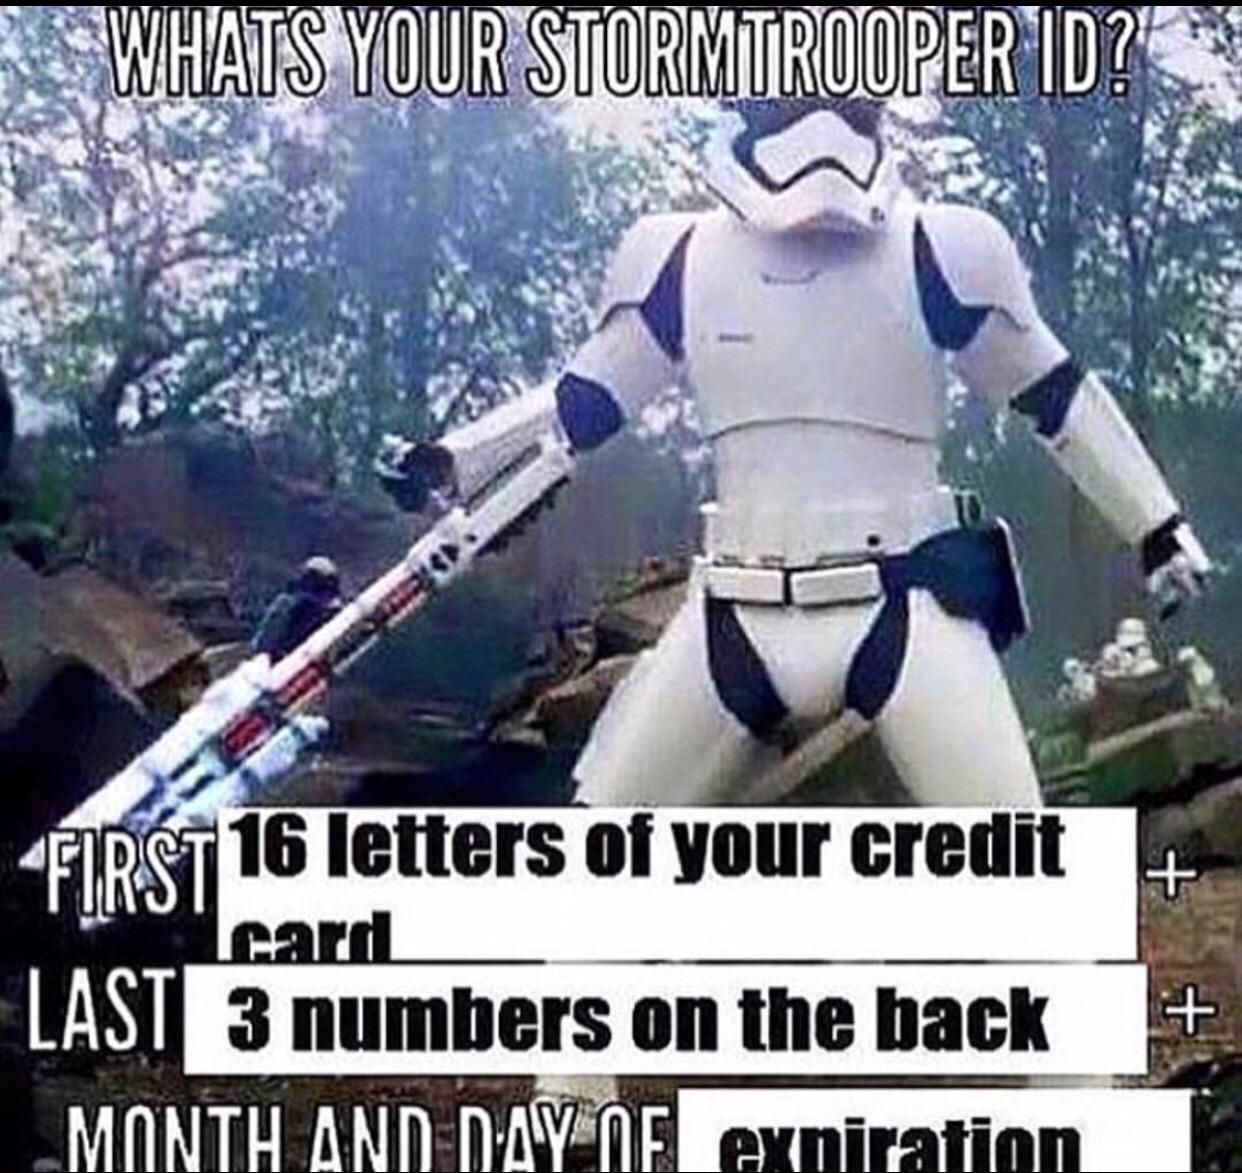 What’s Your Stormtrooper ID?